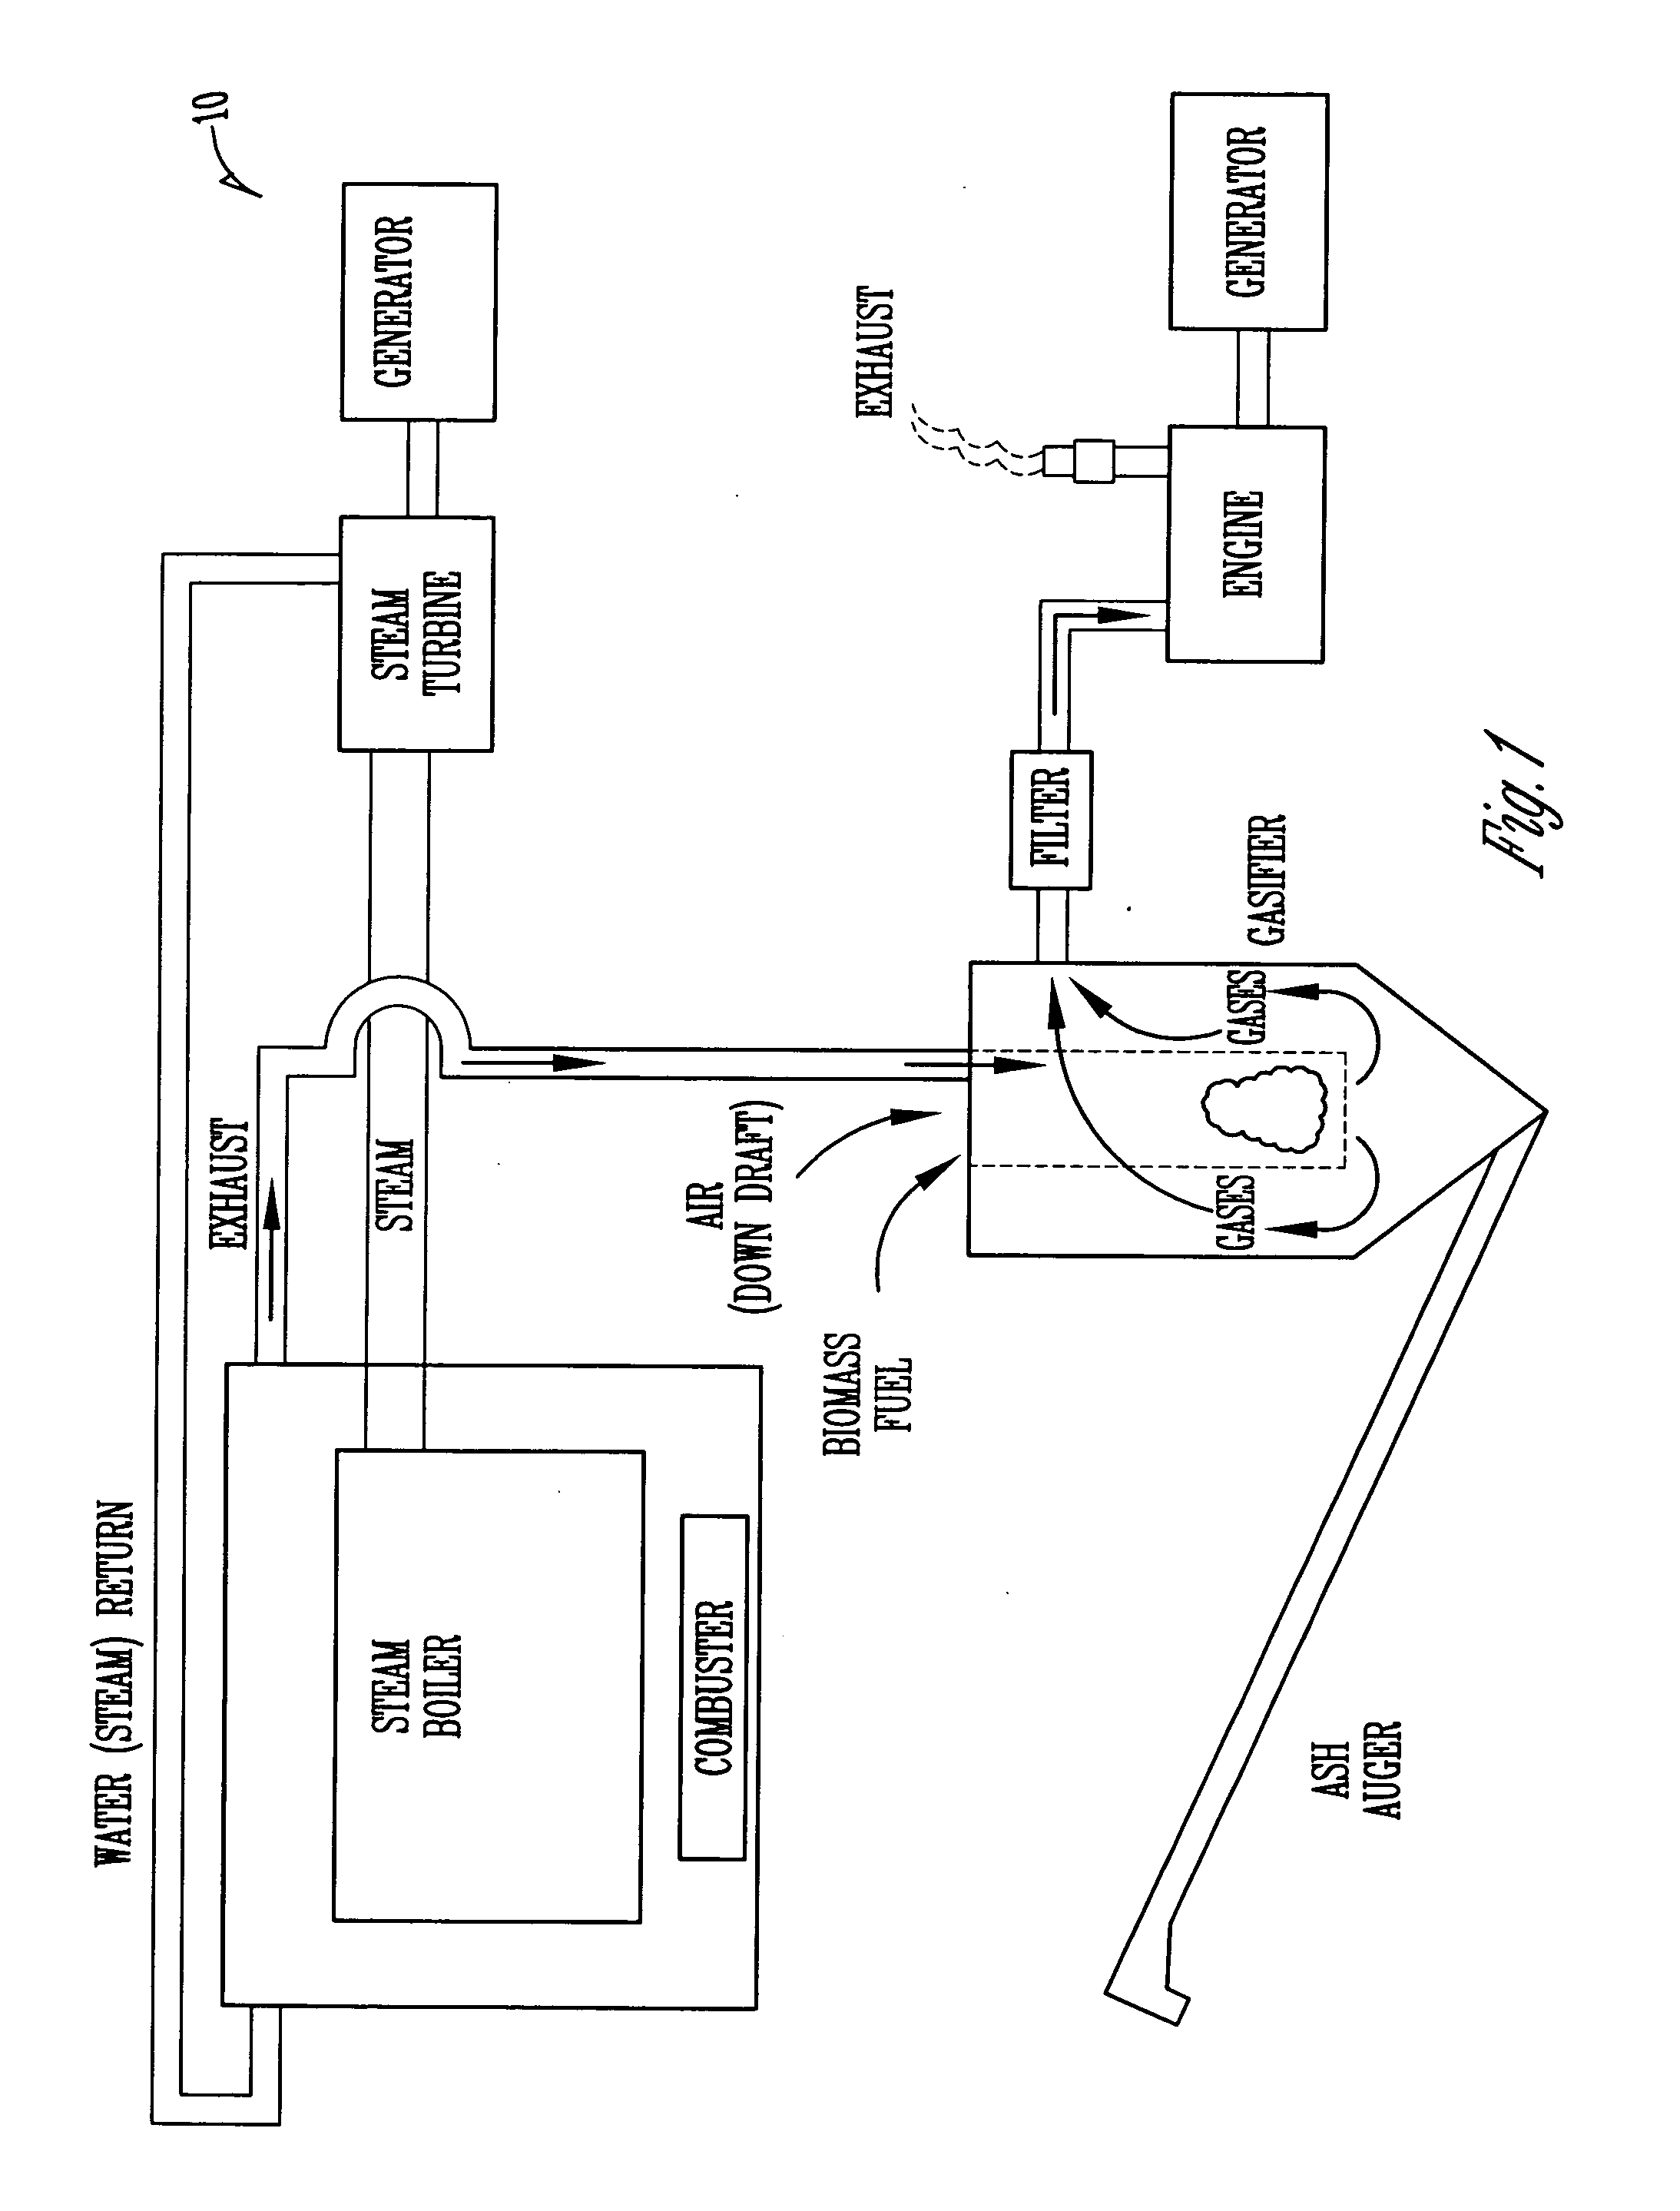 Rotating bed gasifier